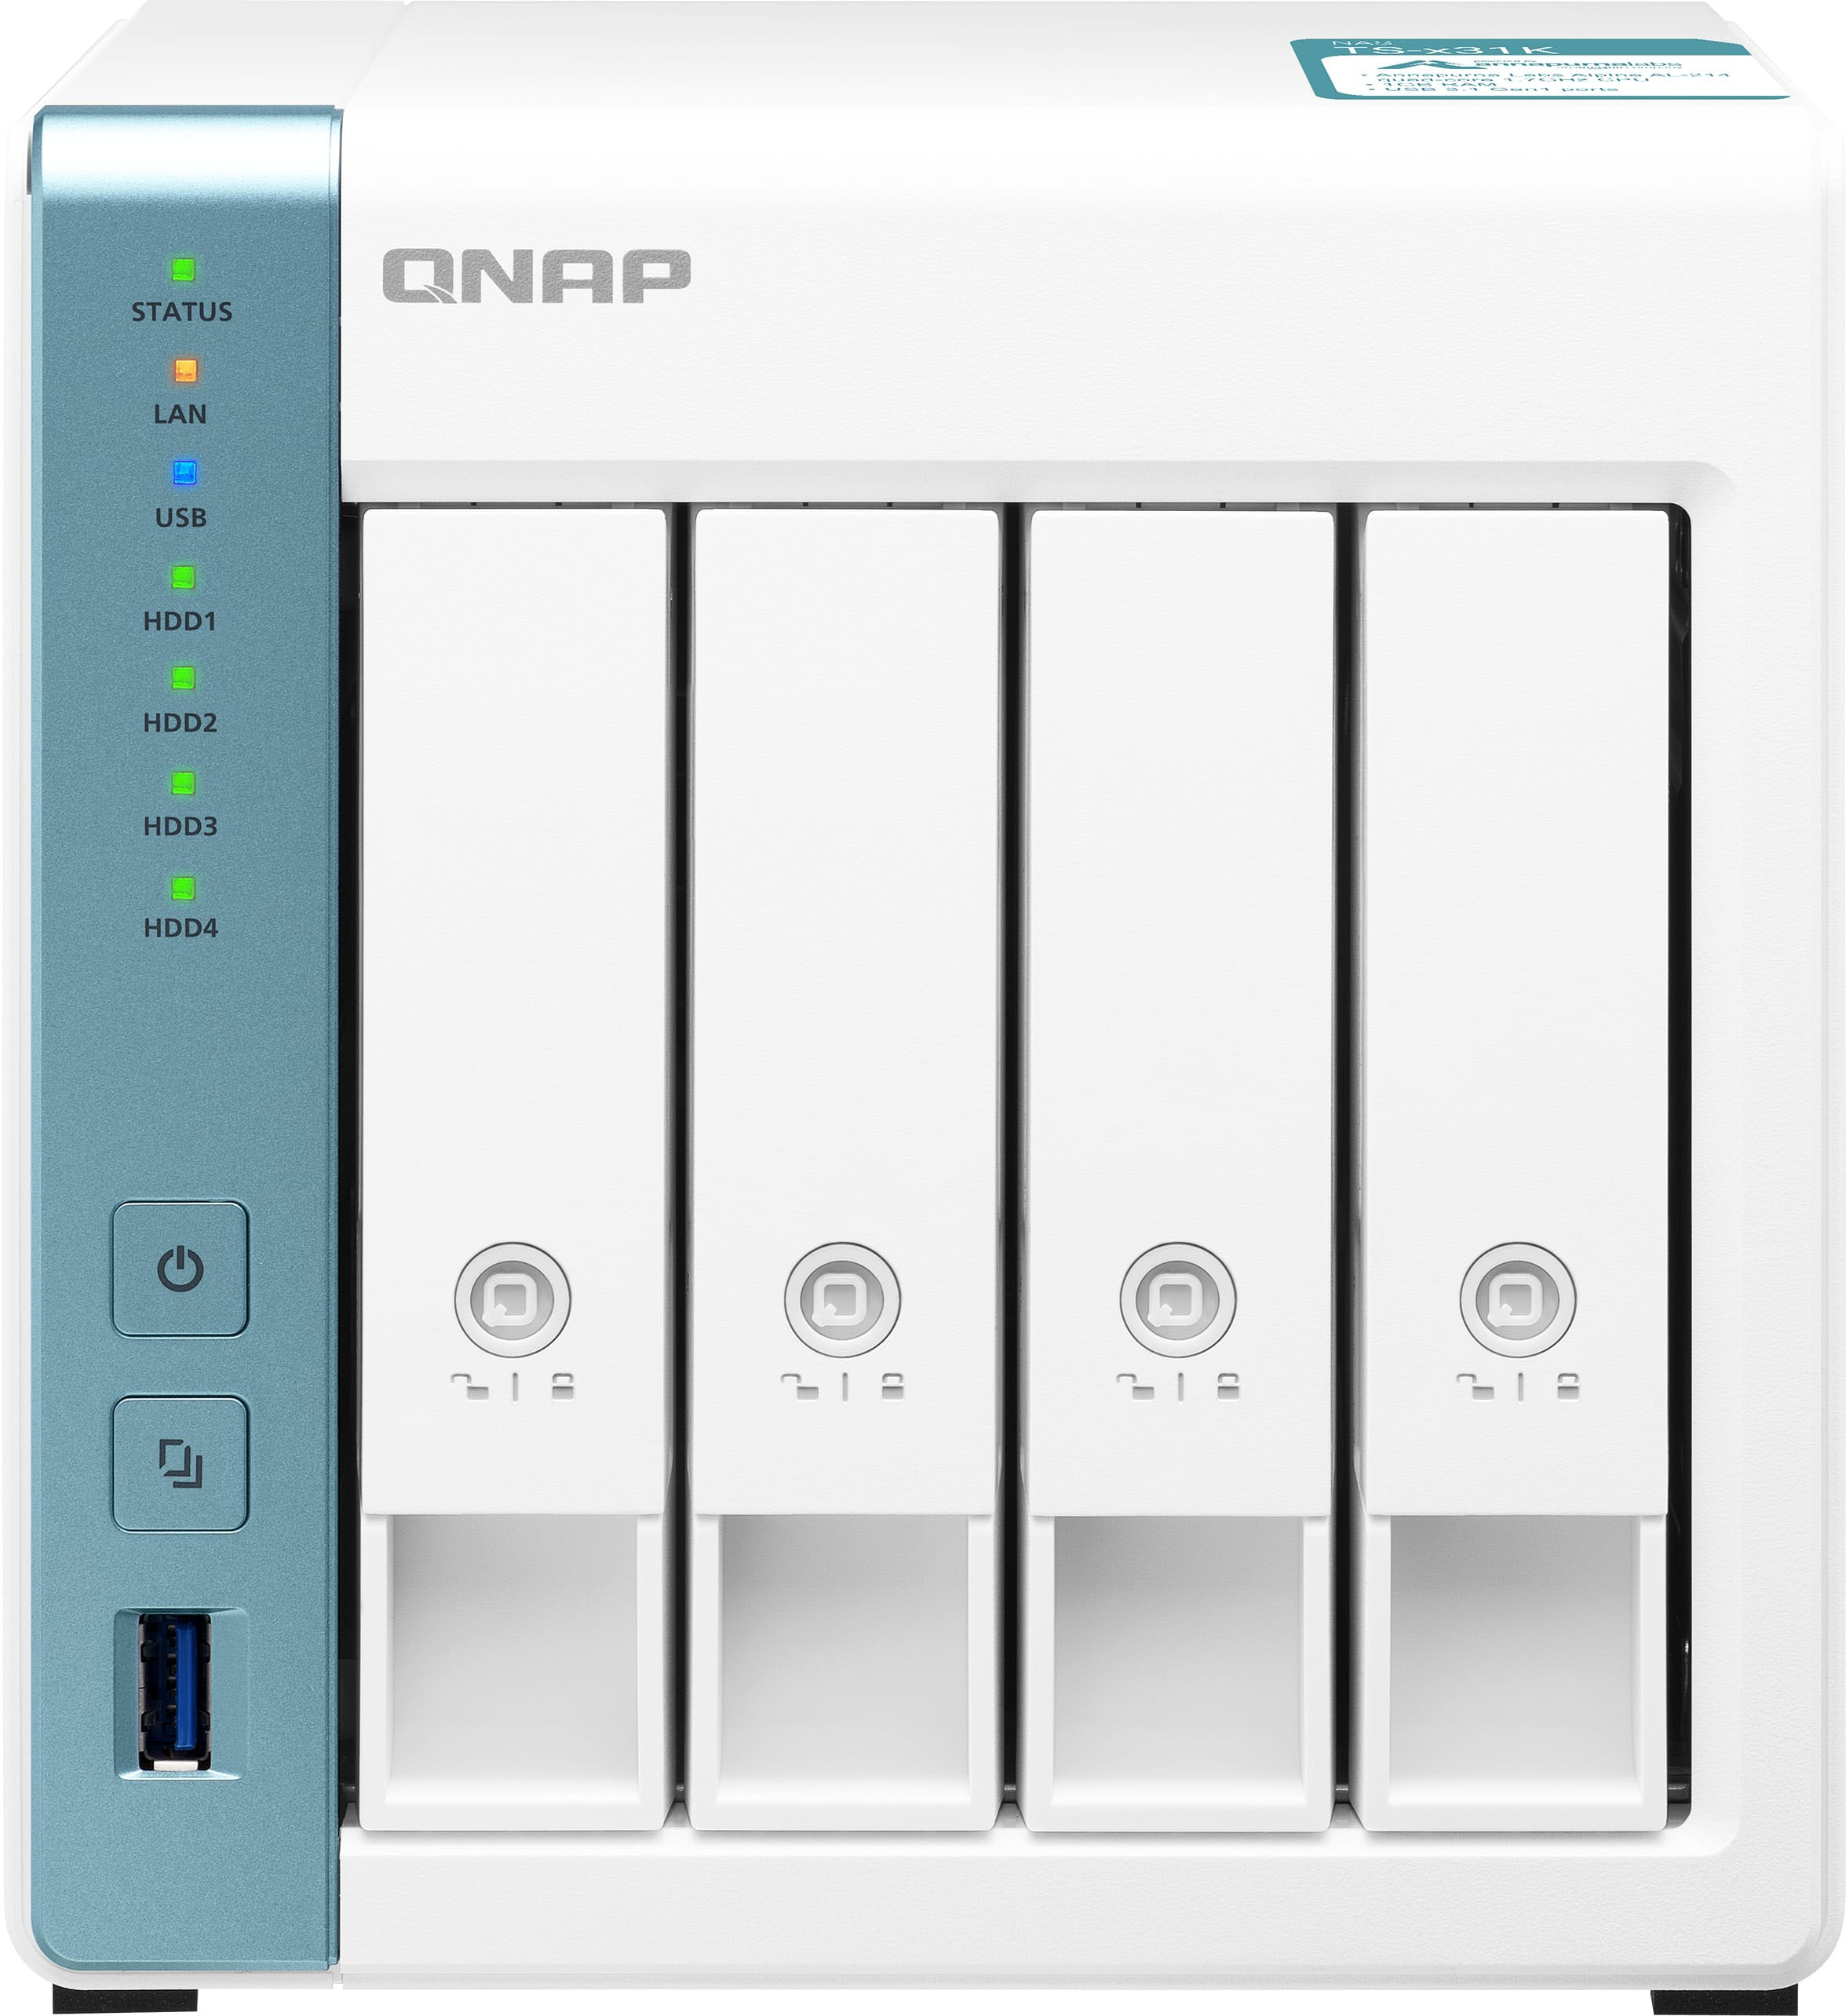 QNAP - TS-431K 4-Bay, Personal Cloud for Backup and Data Sharing, 1GB RAM, External Network Attached Storage (NAS) - White